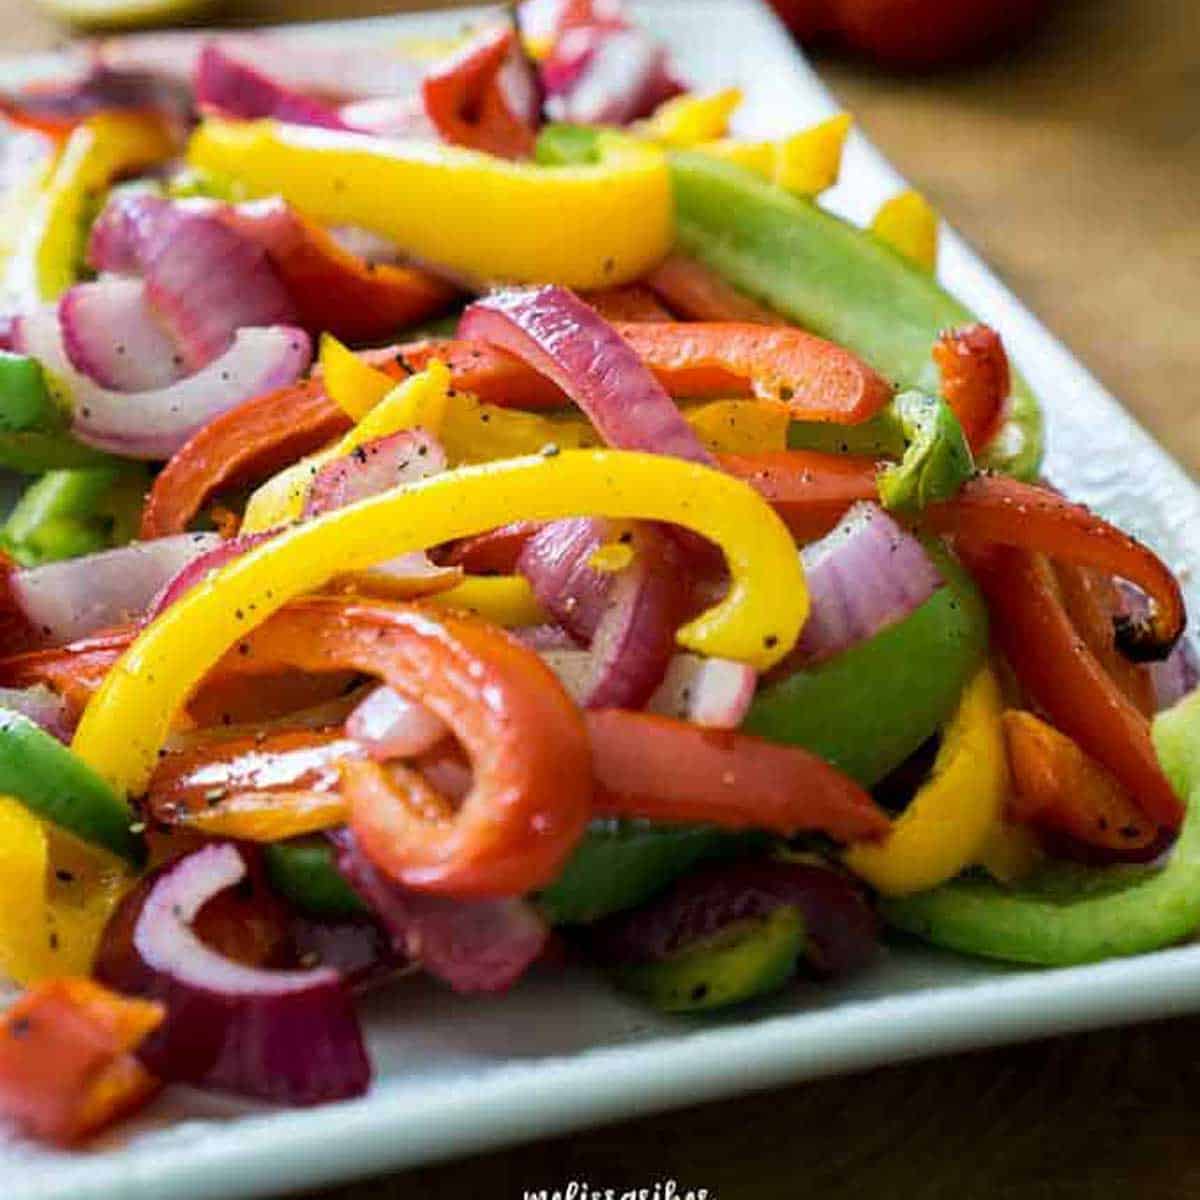 https://www.shakentogetherlife.com/wp-content/uploads/2022/05/easy-roasted-peppers-featured.jpg